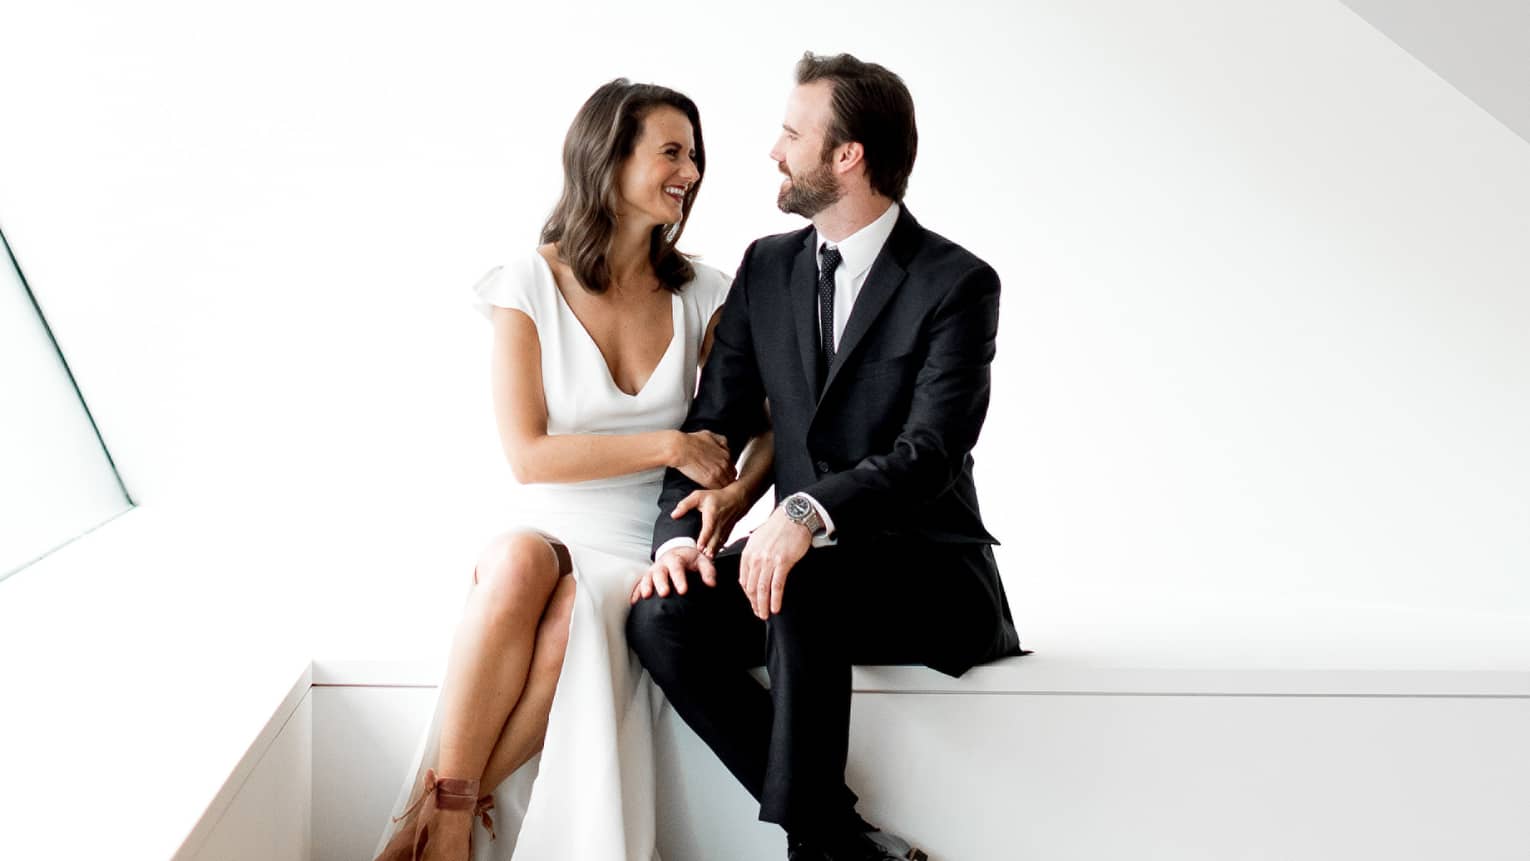 Bride and groom sit on ledge in bright, modern white room